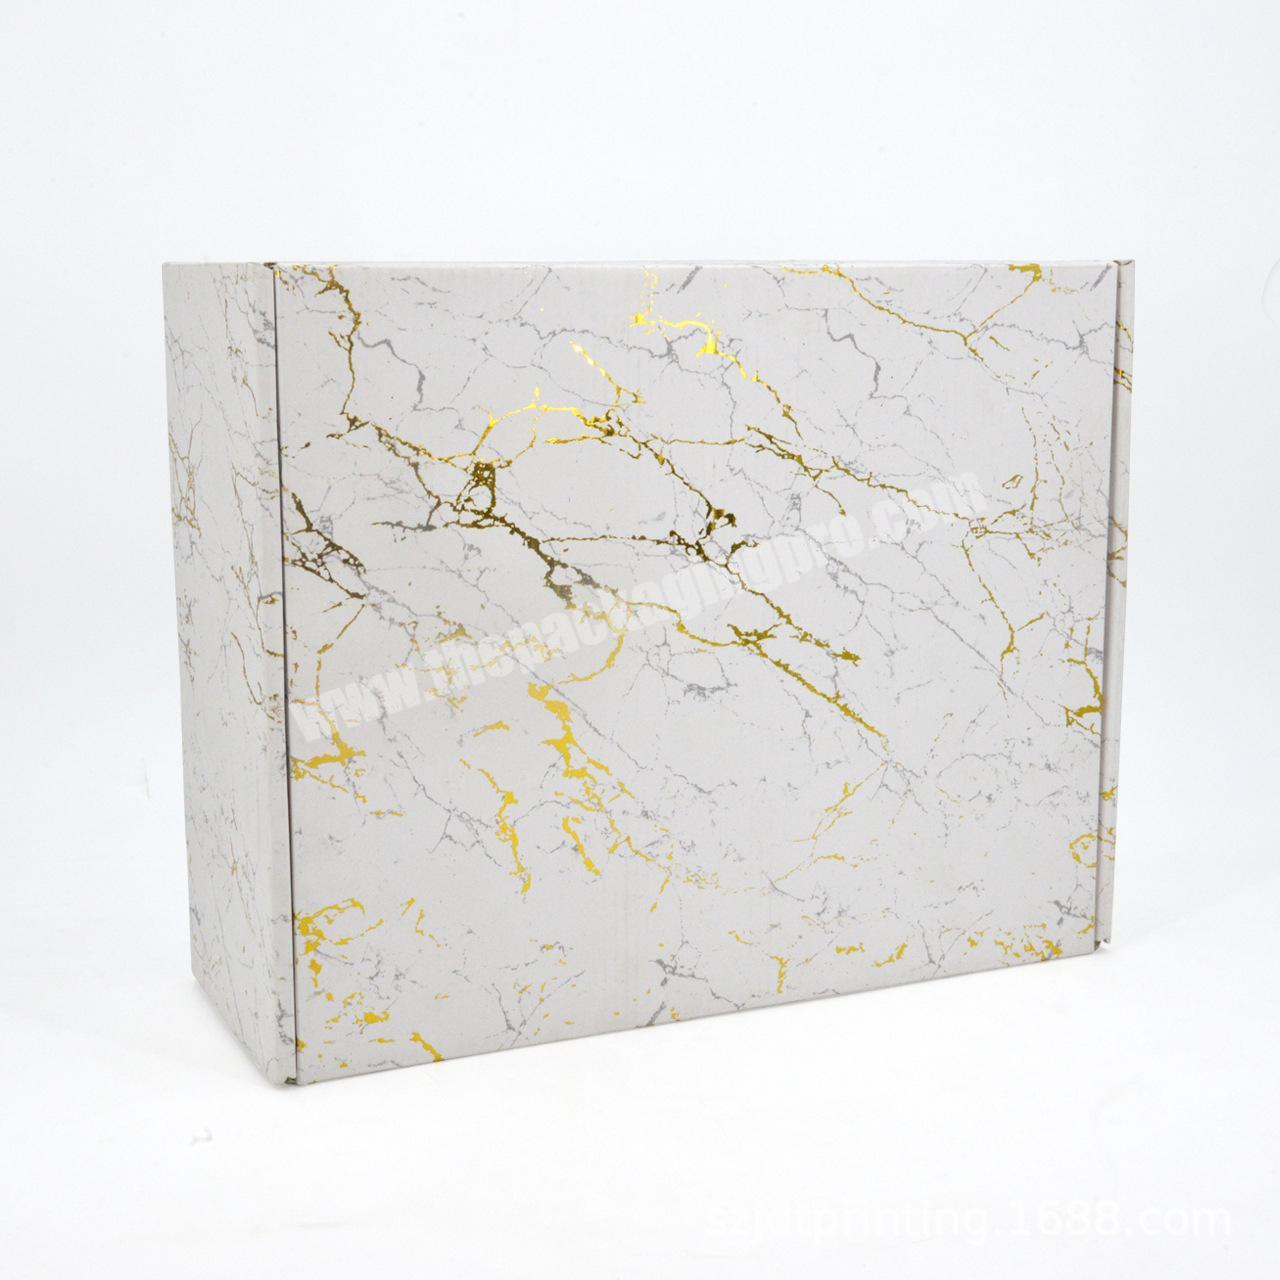 Hot Selling A4 Size Marble Spot Uv Printing Stronger Customized Gift Box